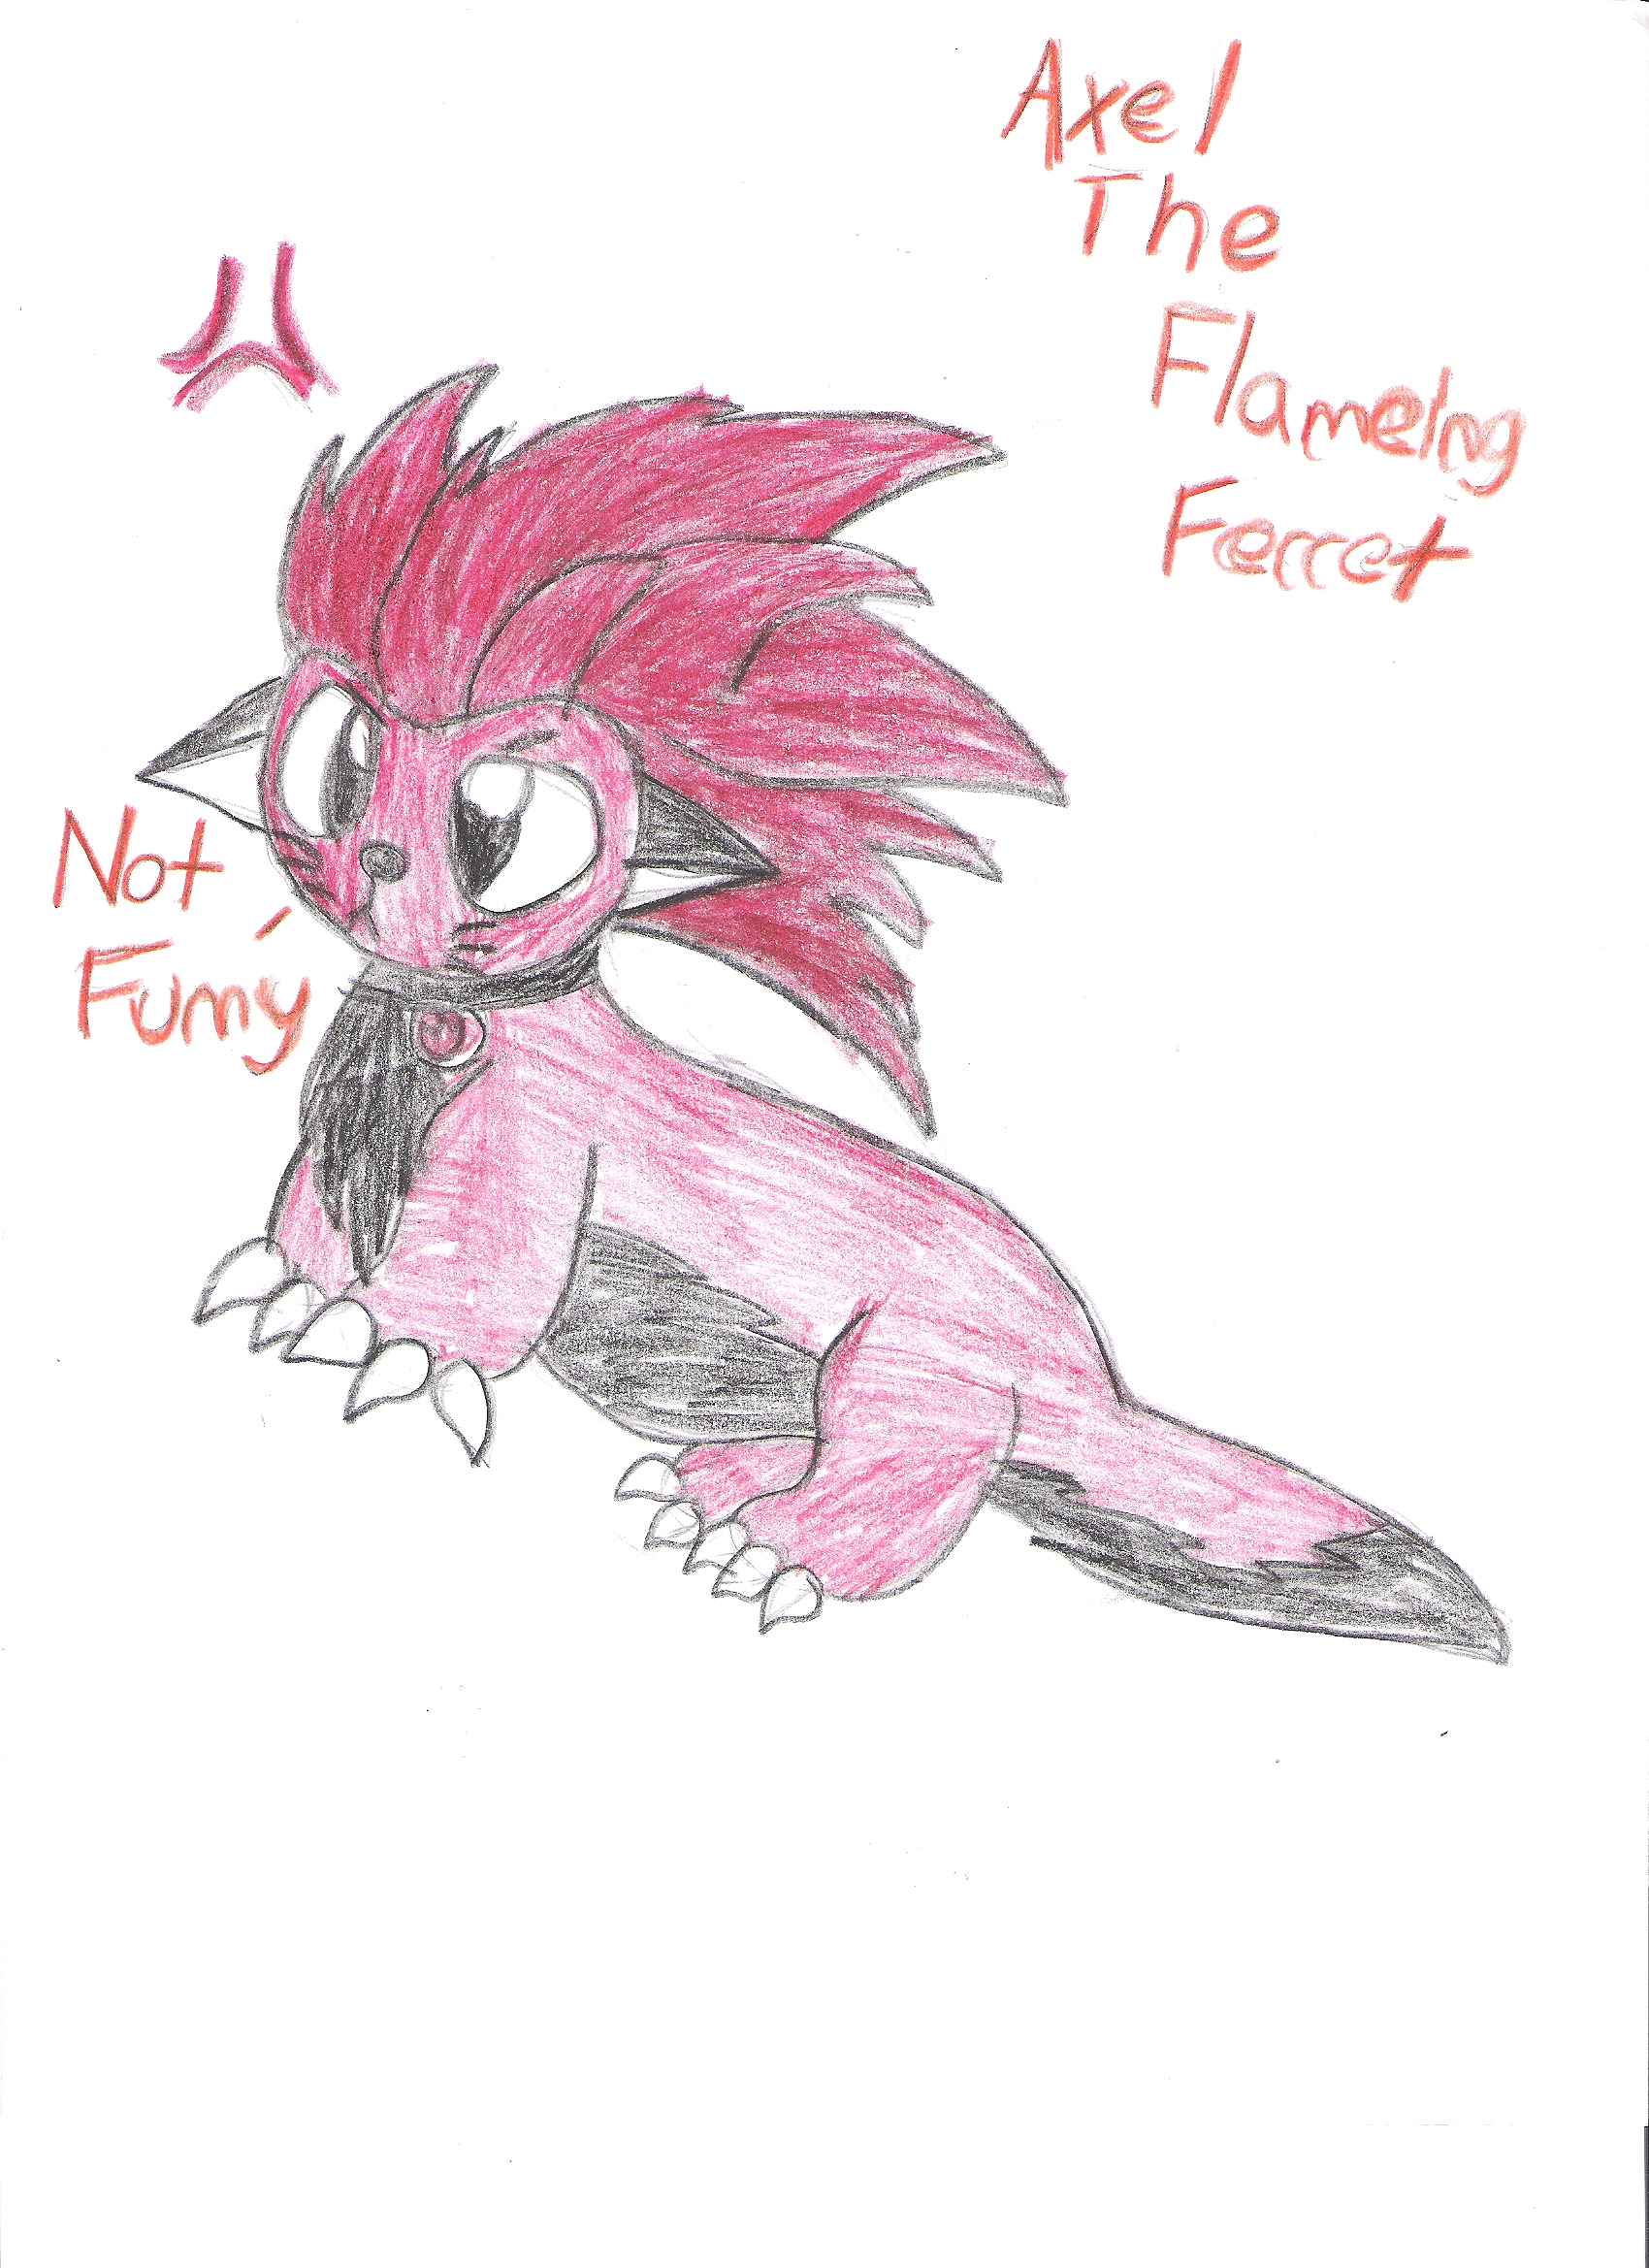 Behold: The Flameing Ferret by Arue